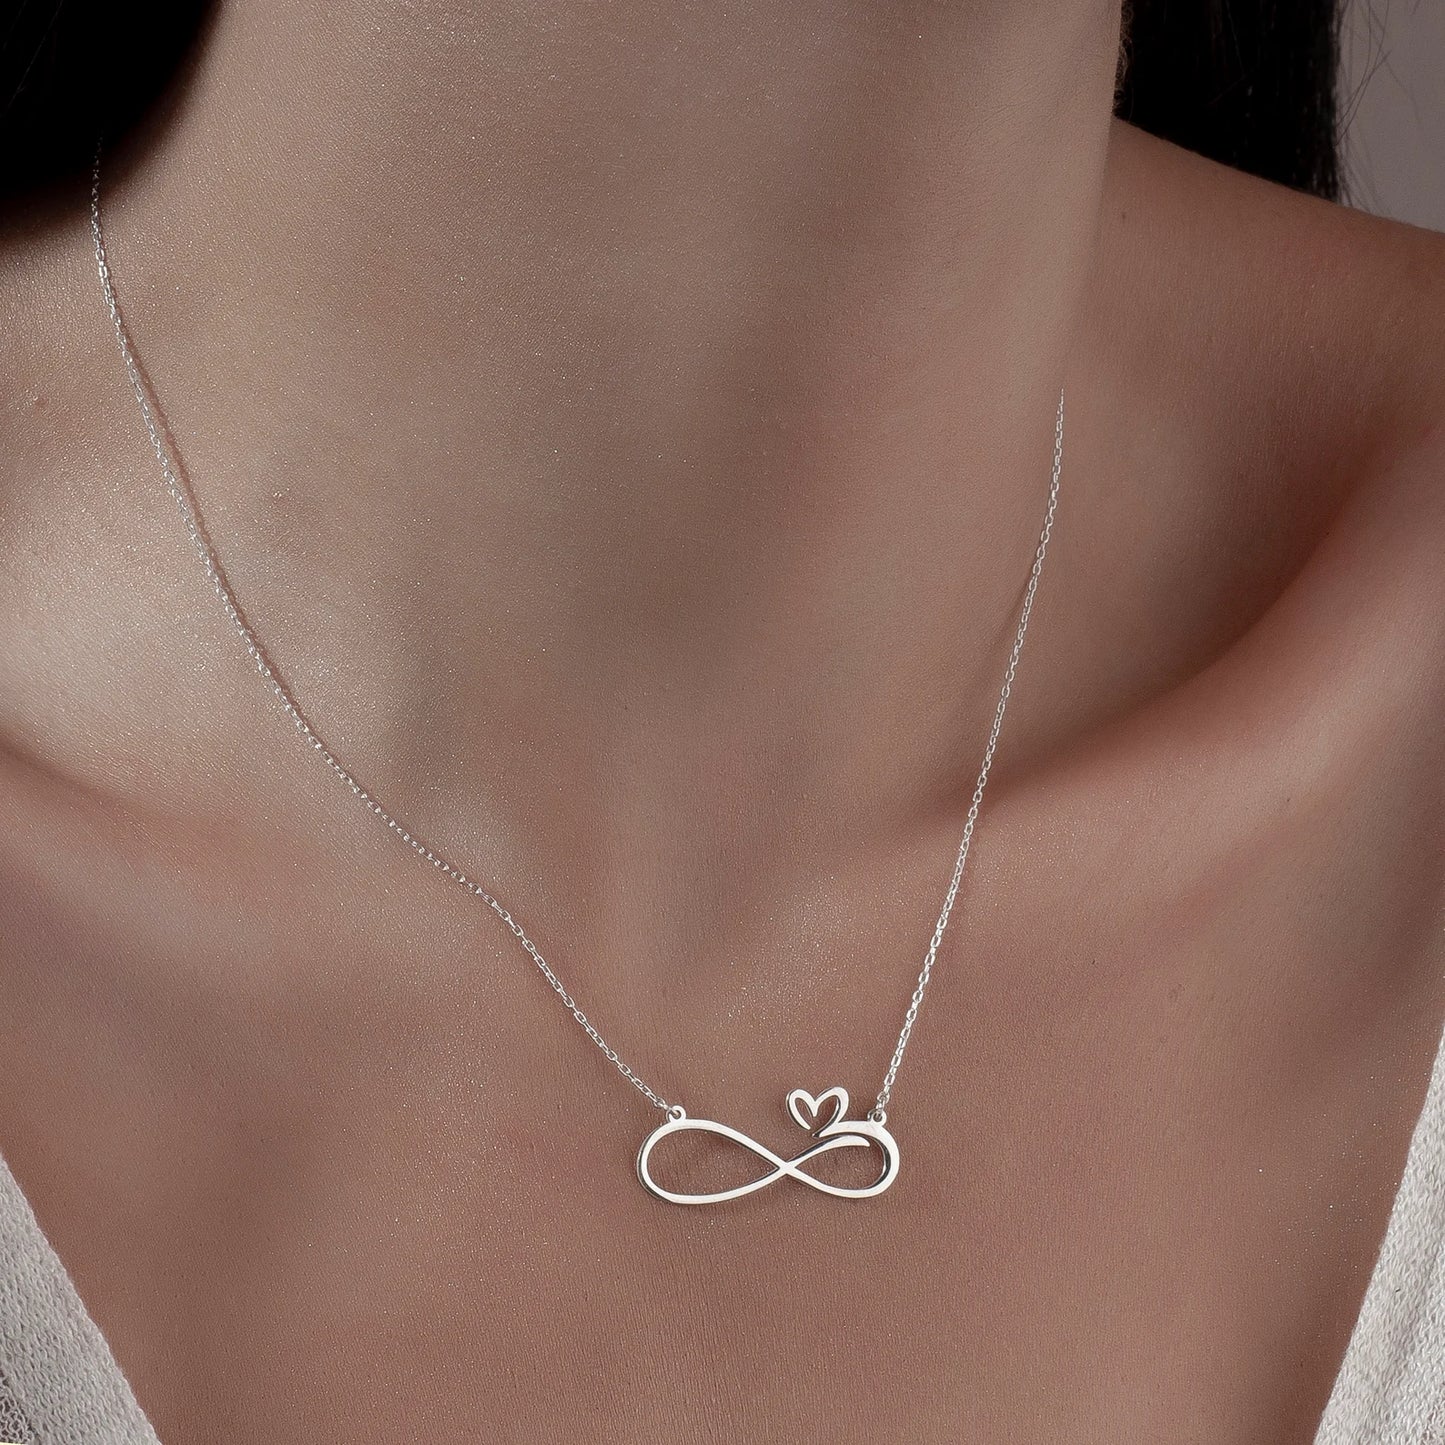 18 Carat Gold Infinity Heart Necklace - A Radiant Symbol of Eternal Love